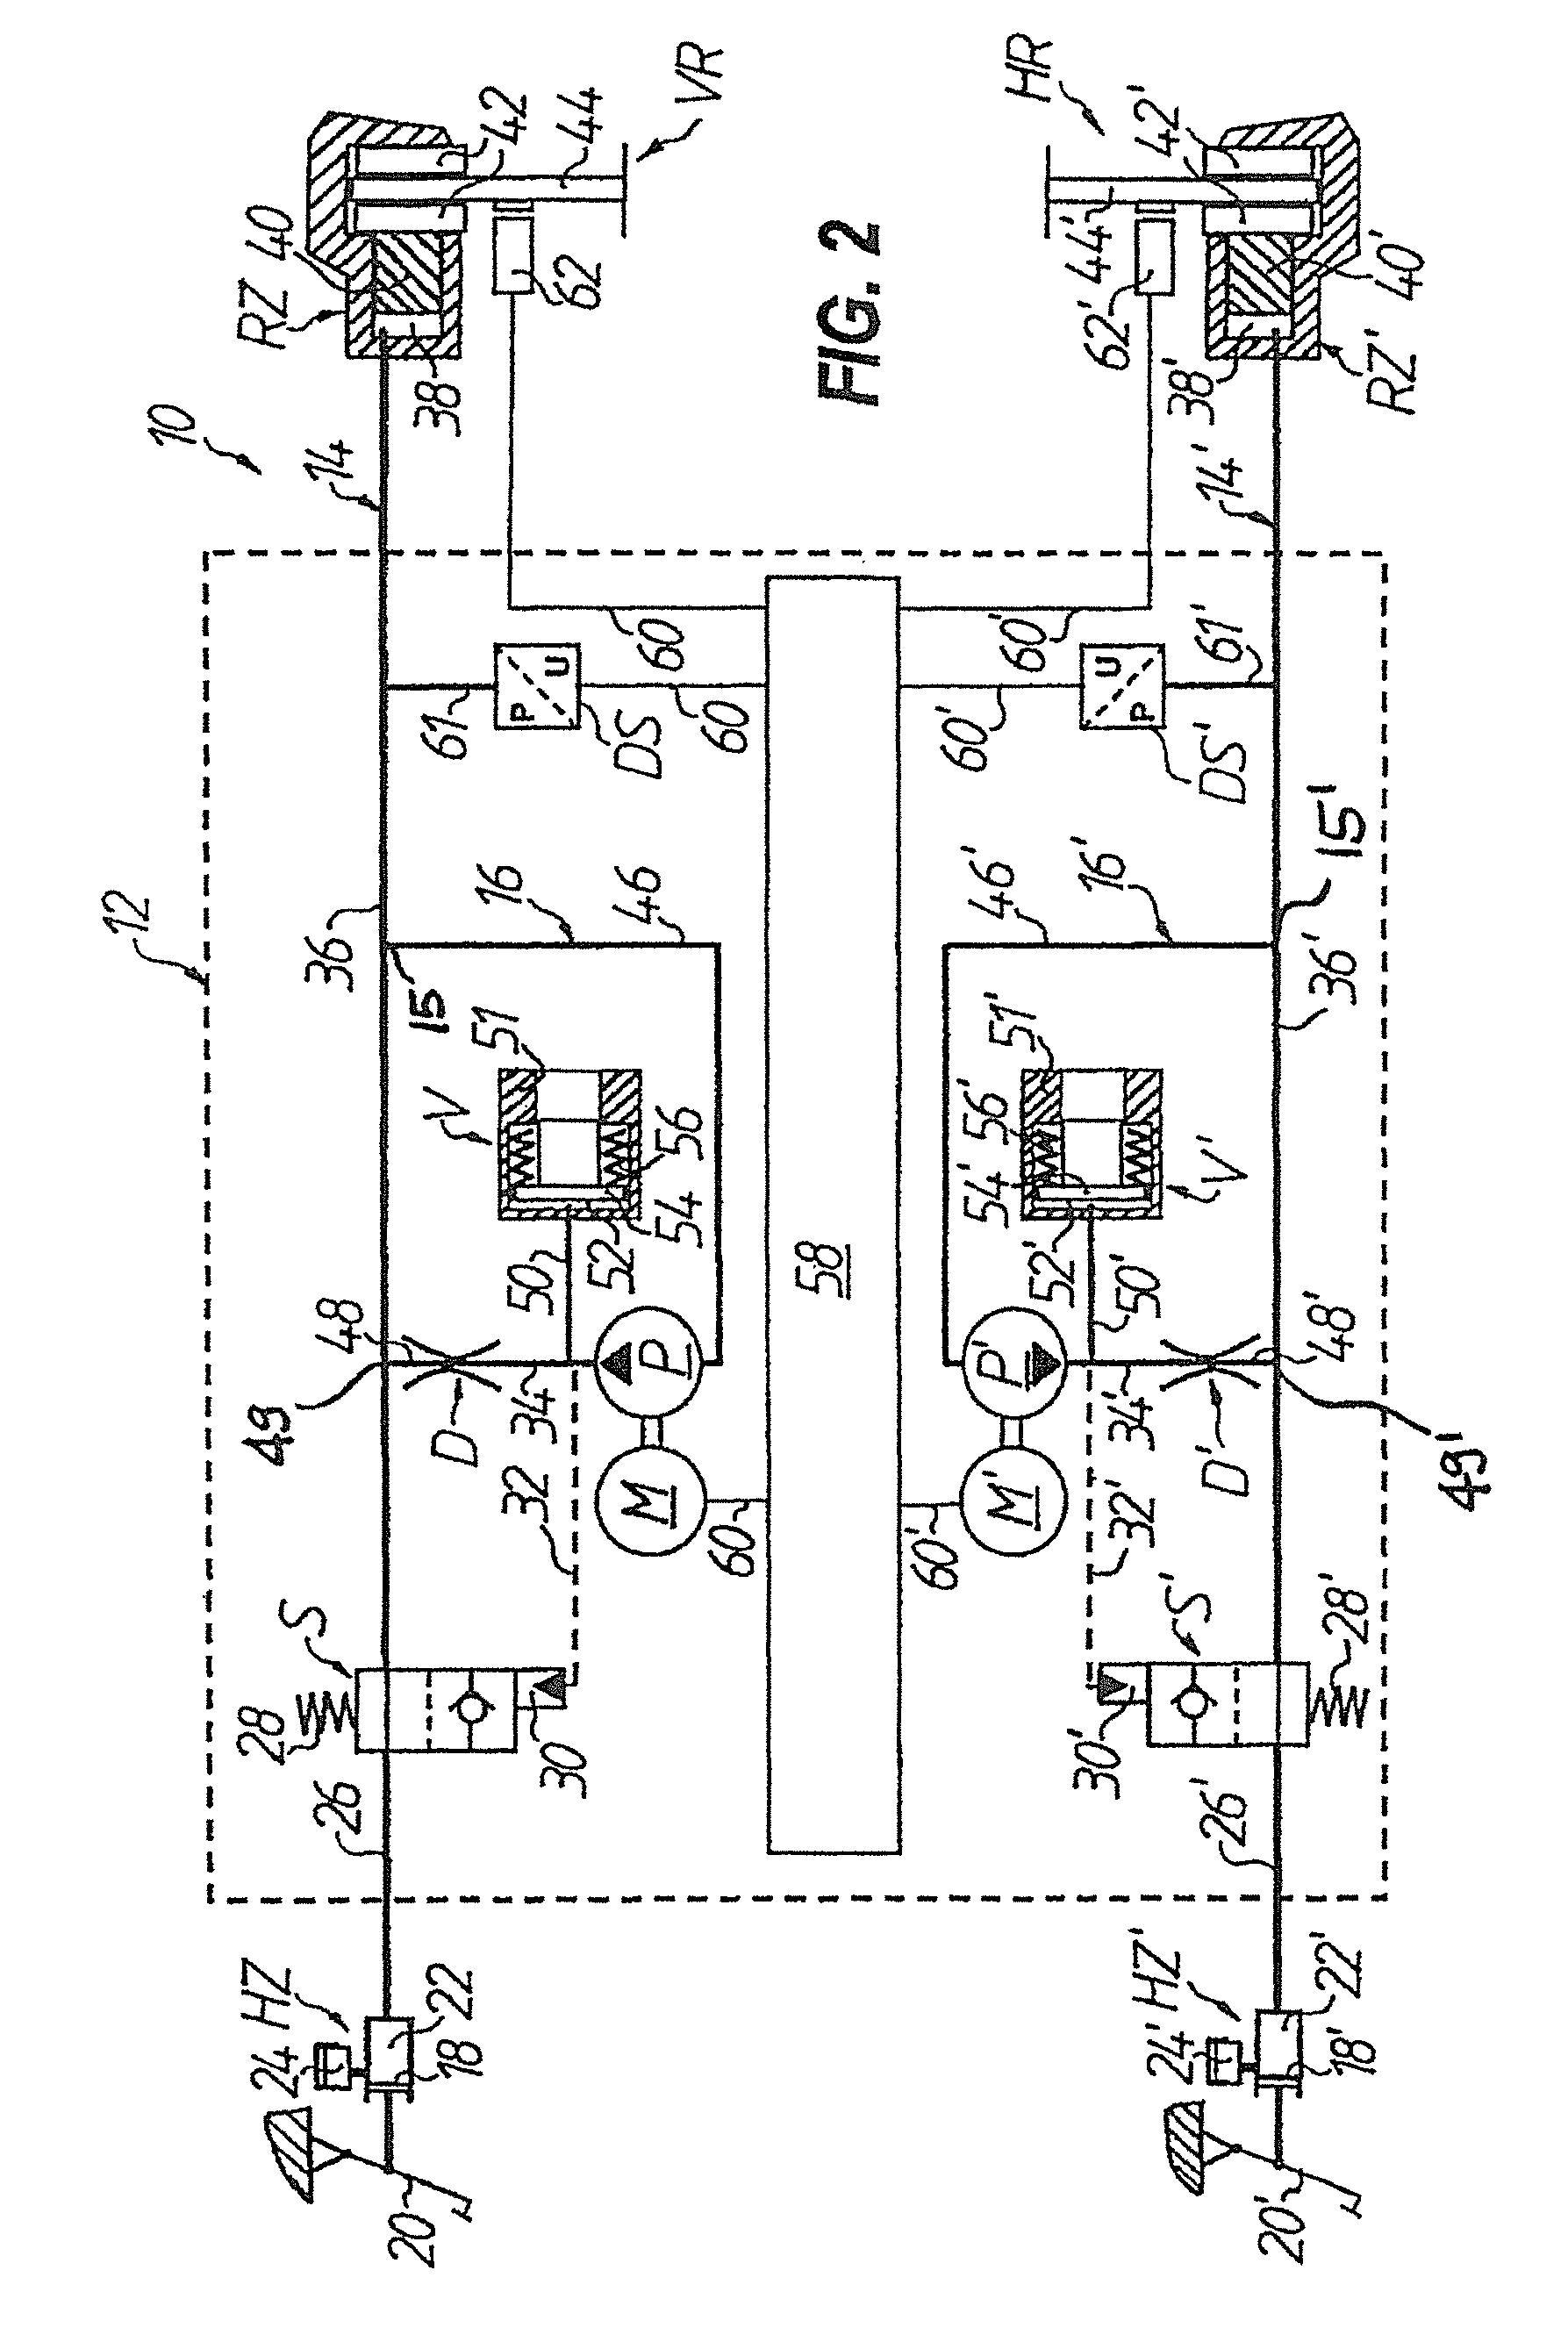 Anti-lock hydraulic braking system, in particular for motorized two-wheel vehicles